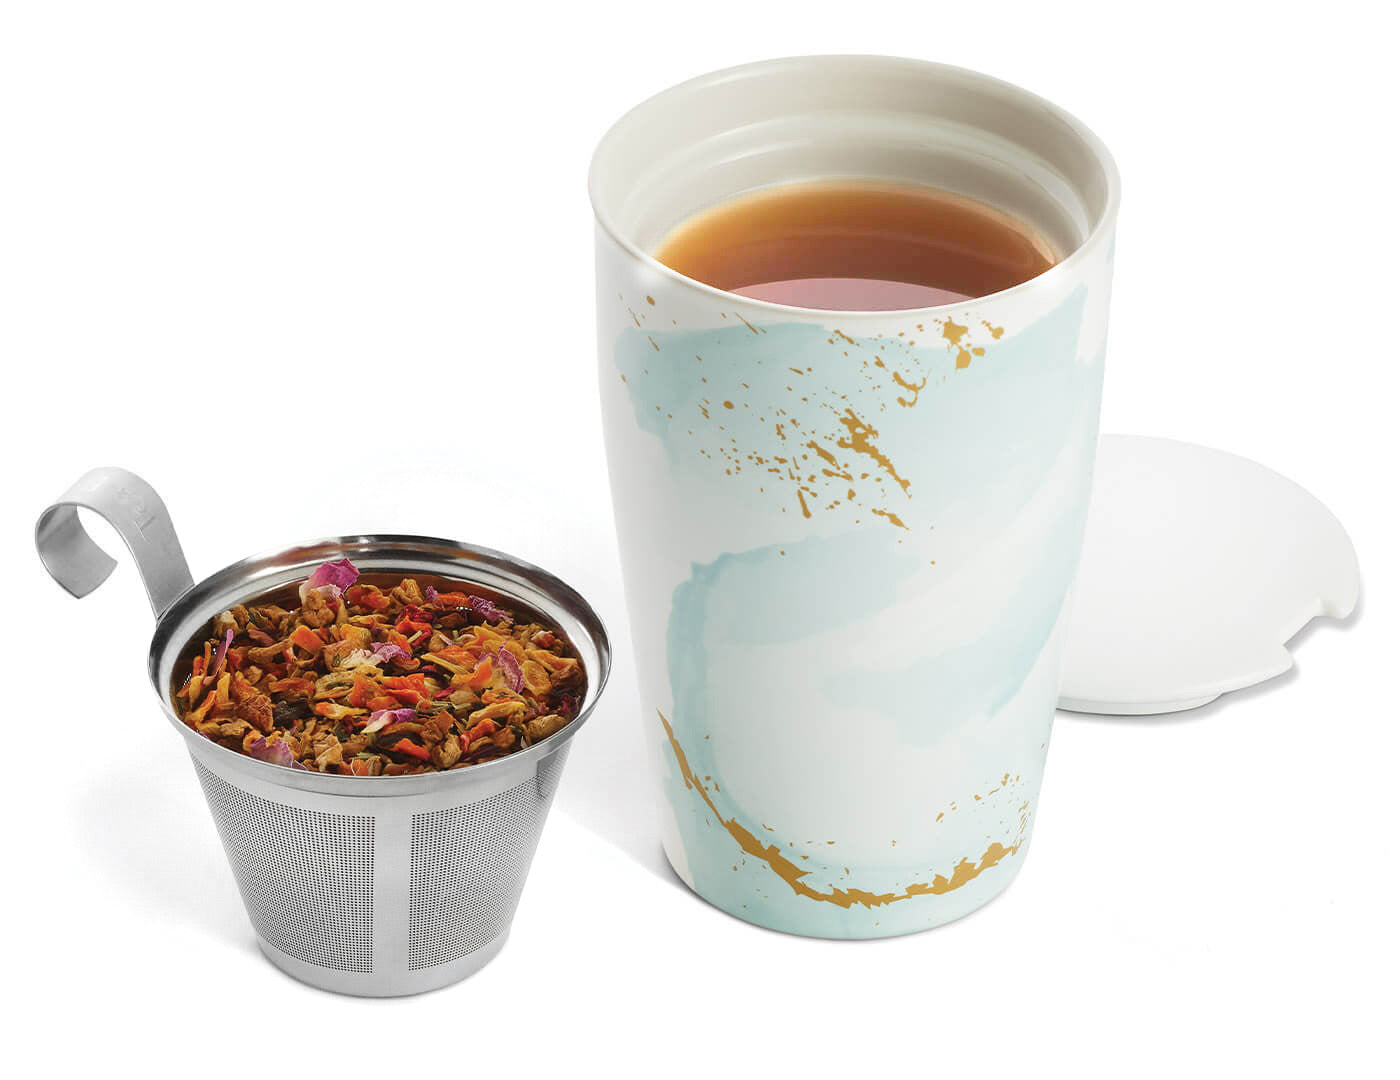 Wellbeing KATI Steeping Cup with infuser basket out full of tea and steeped tea inside the cup